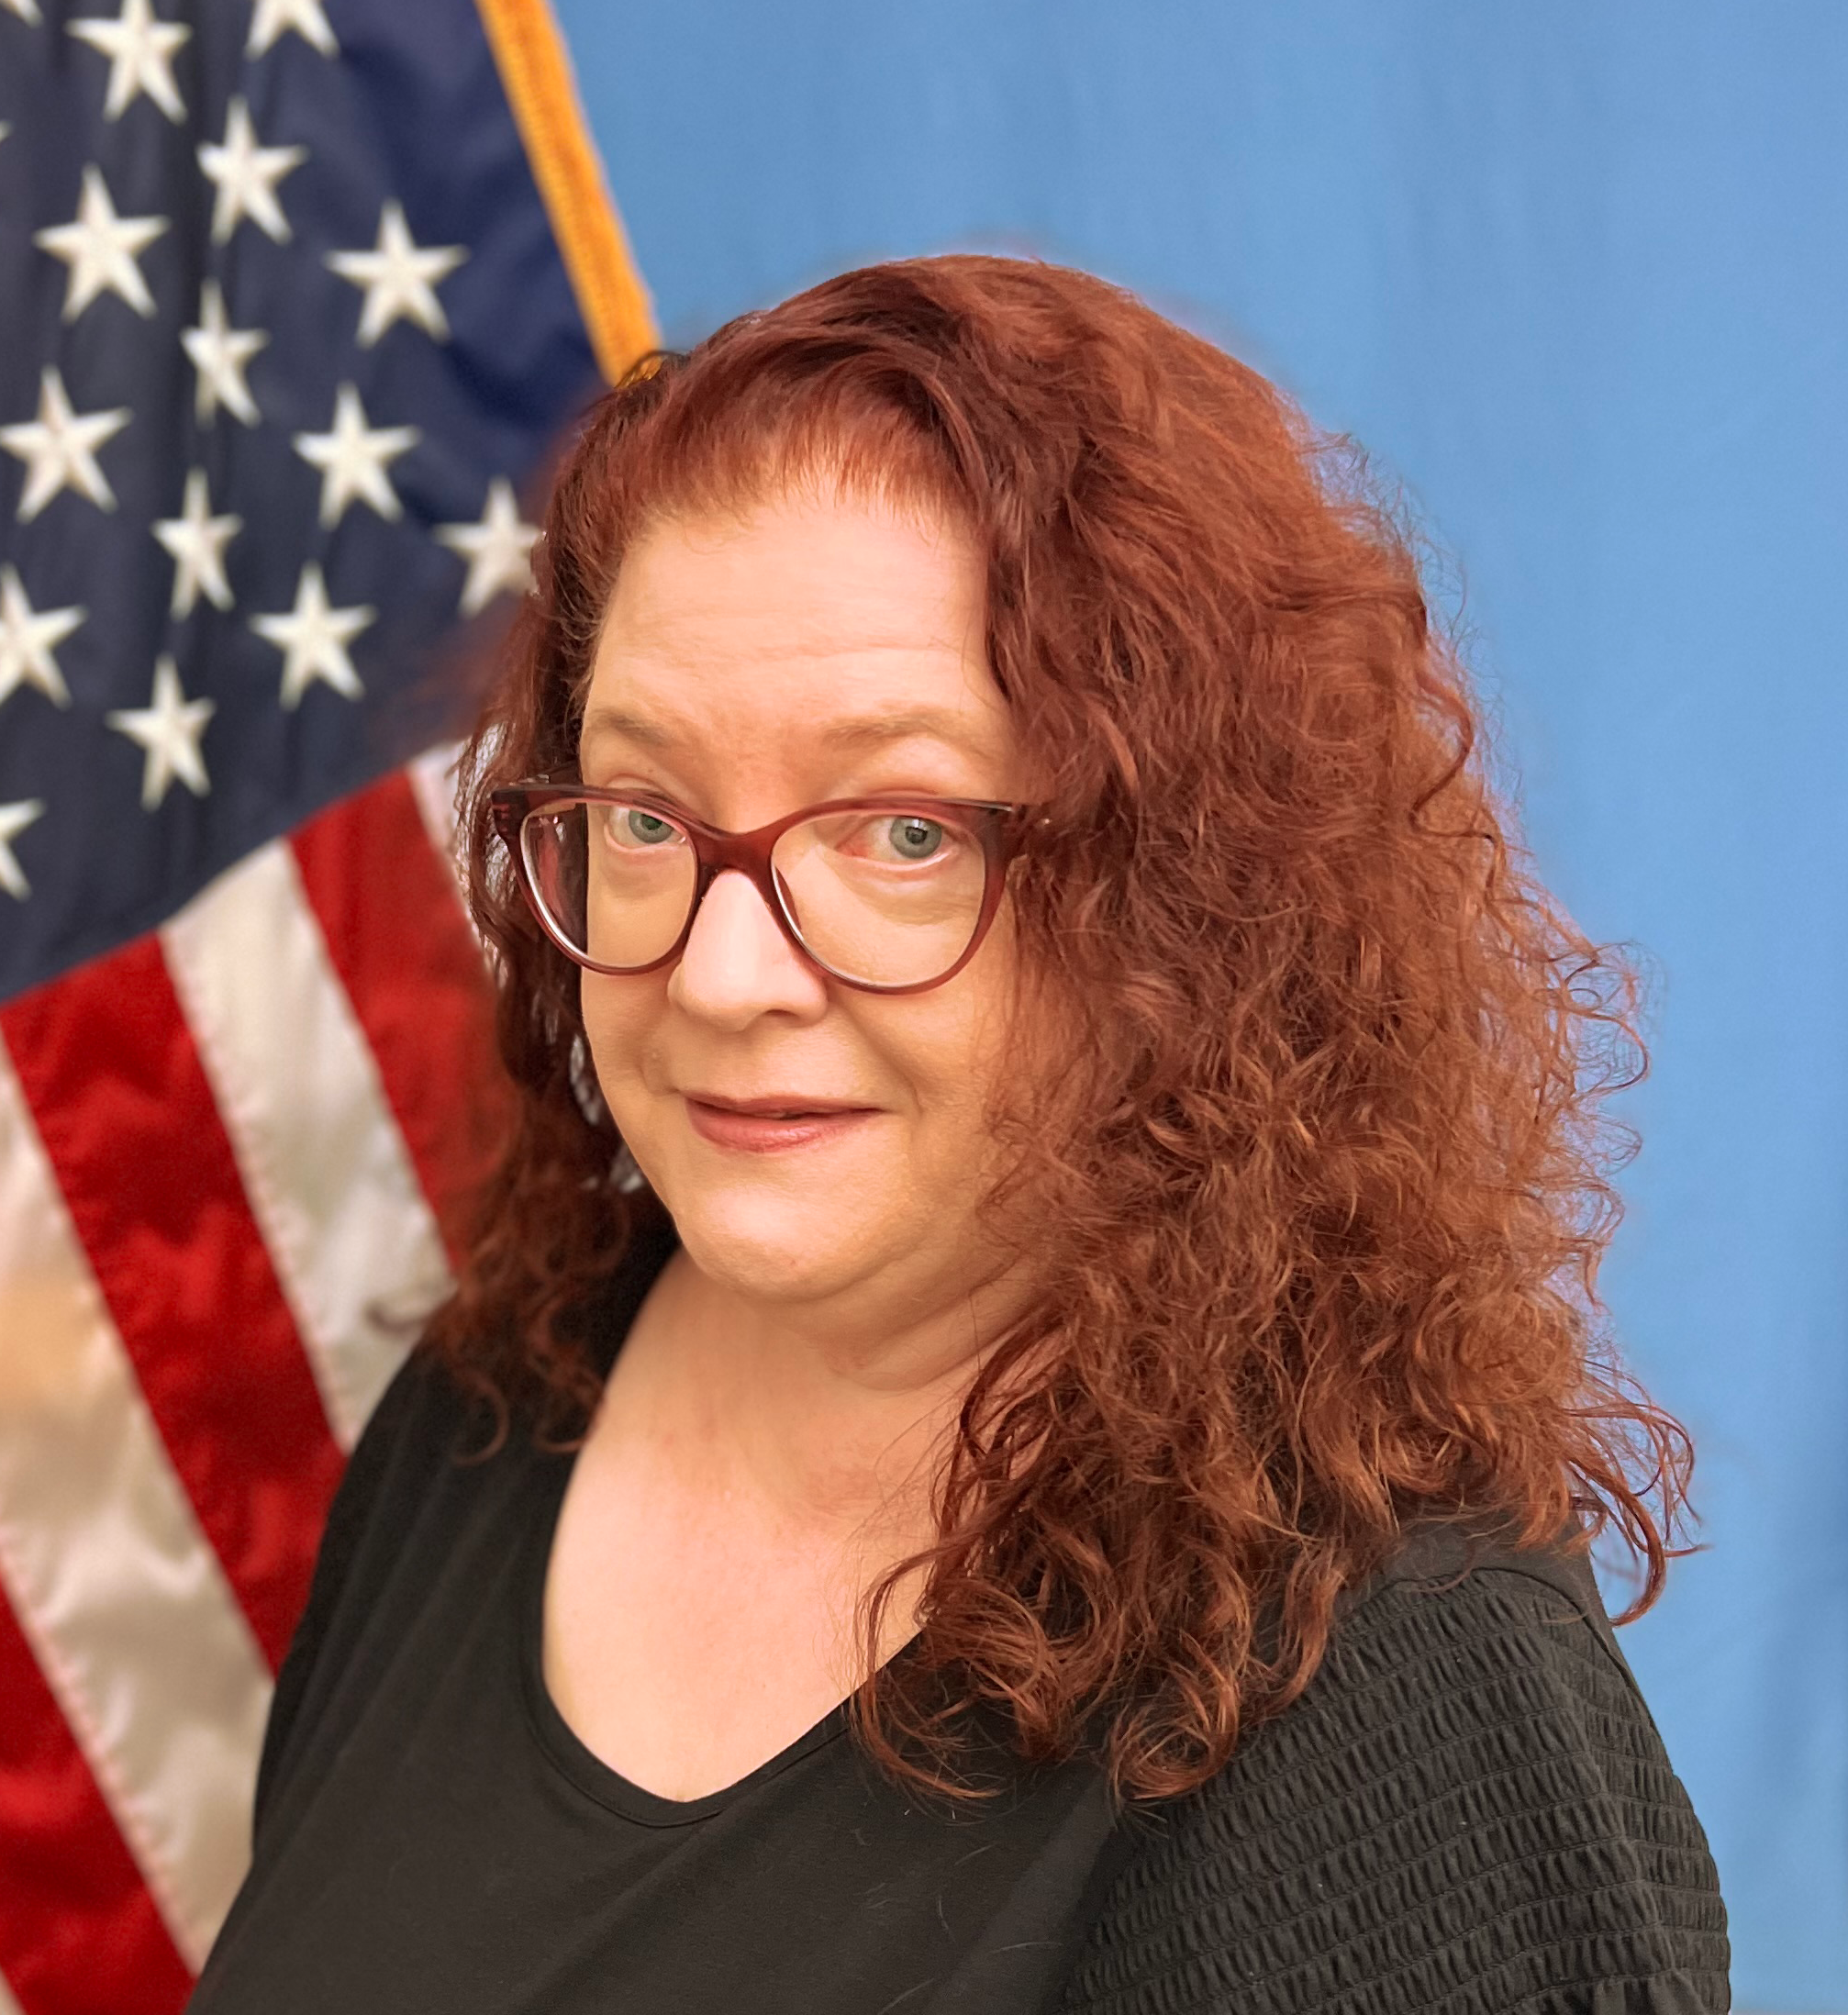 jill rufener with curly red hair with glasses and black blouse posing in front of american flag with blue background 